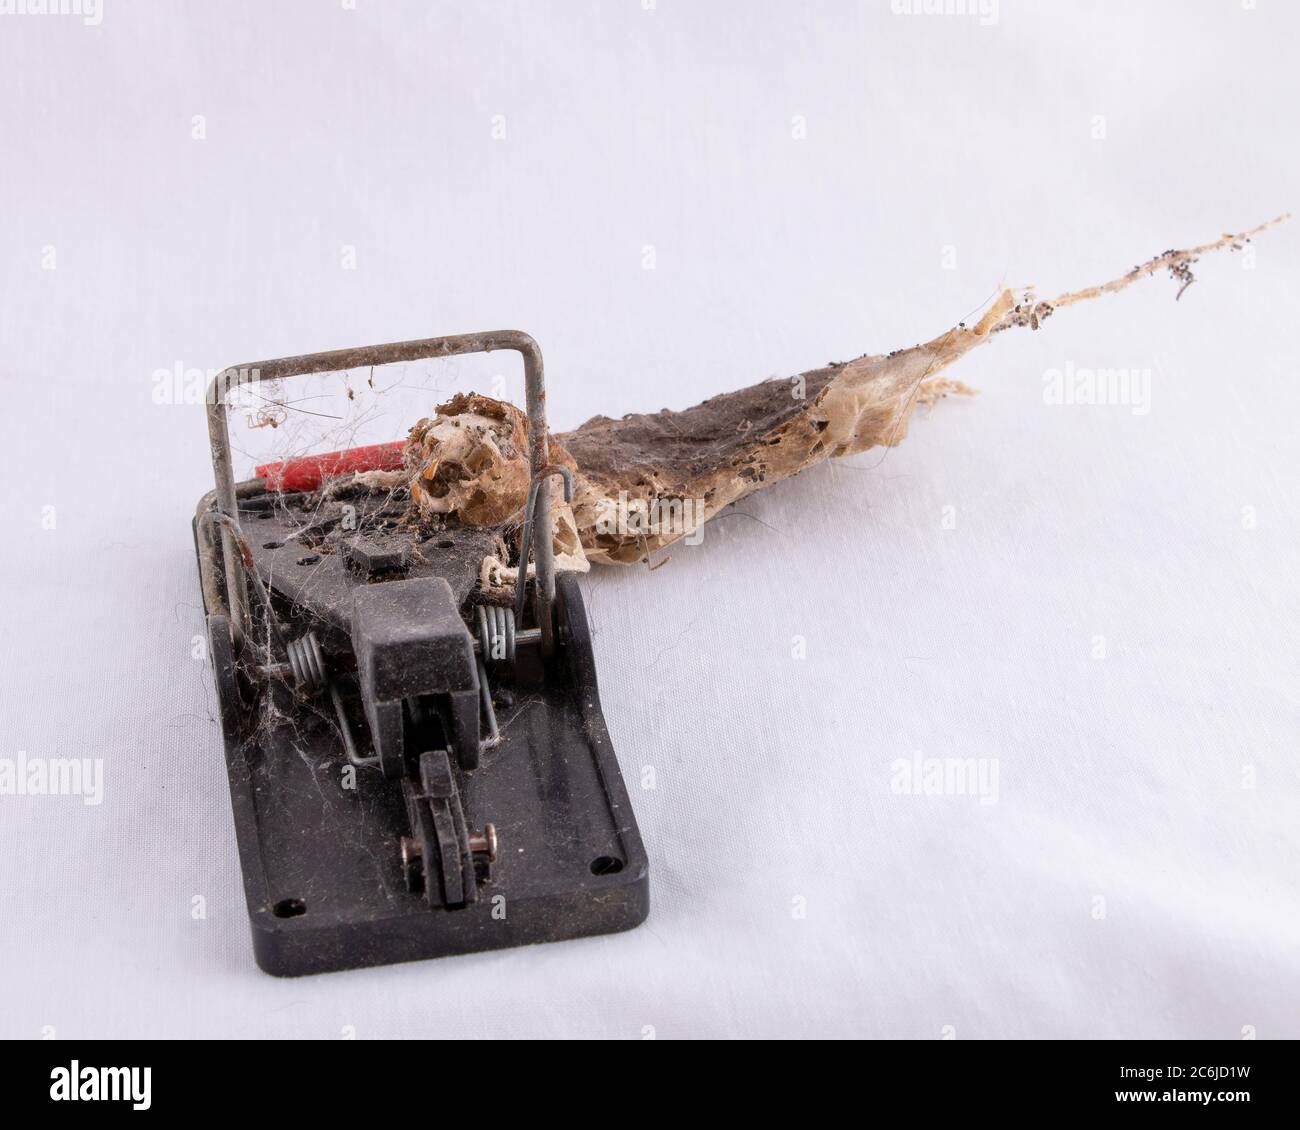 Dessicated mouse, Mus musculus, caught in a mousetrap and left for years on white background Stock Photo